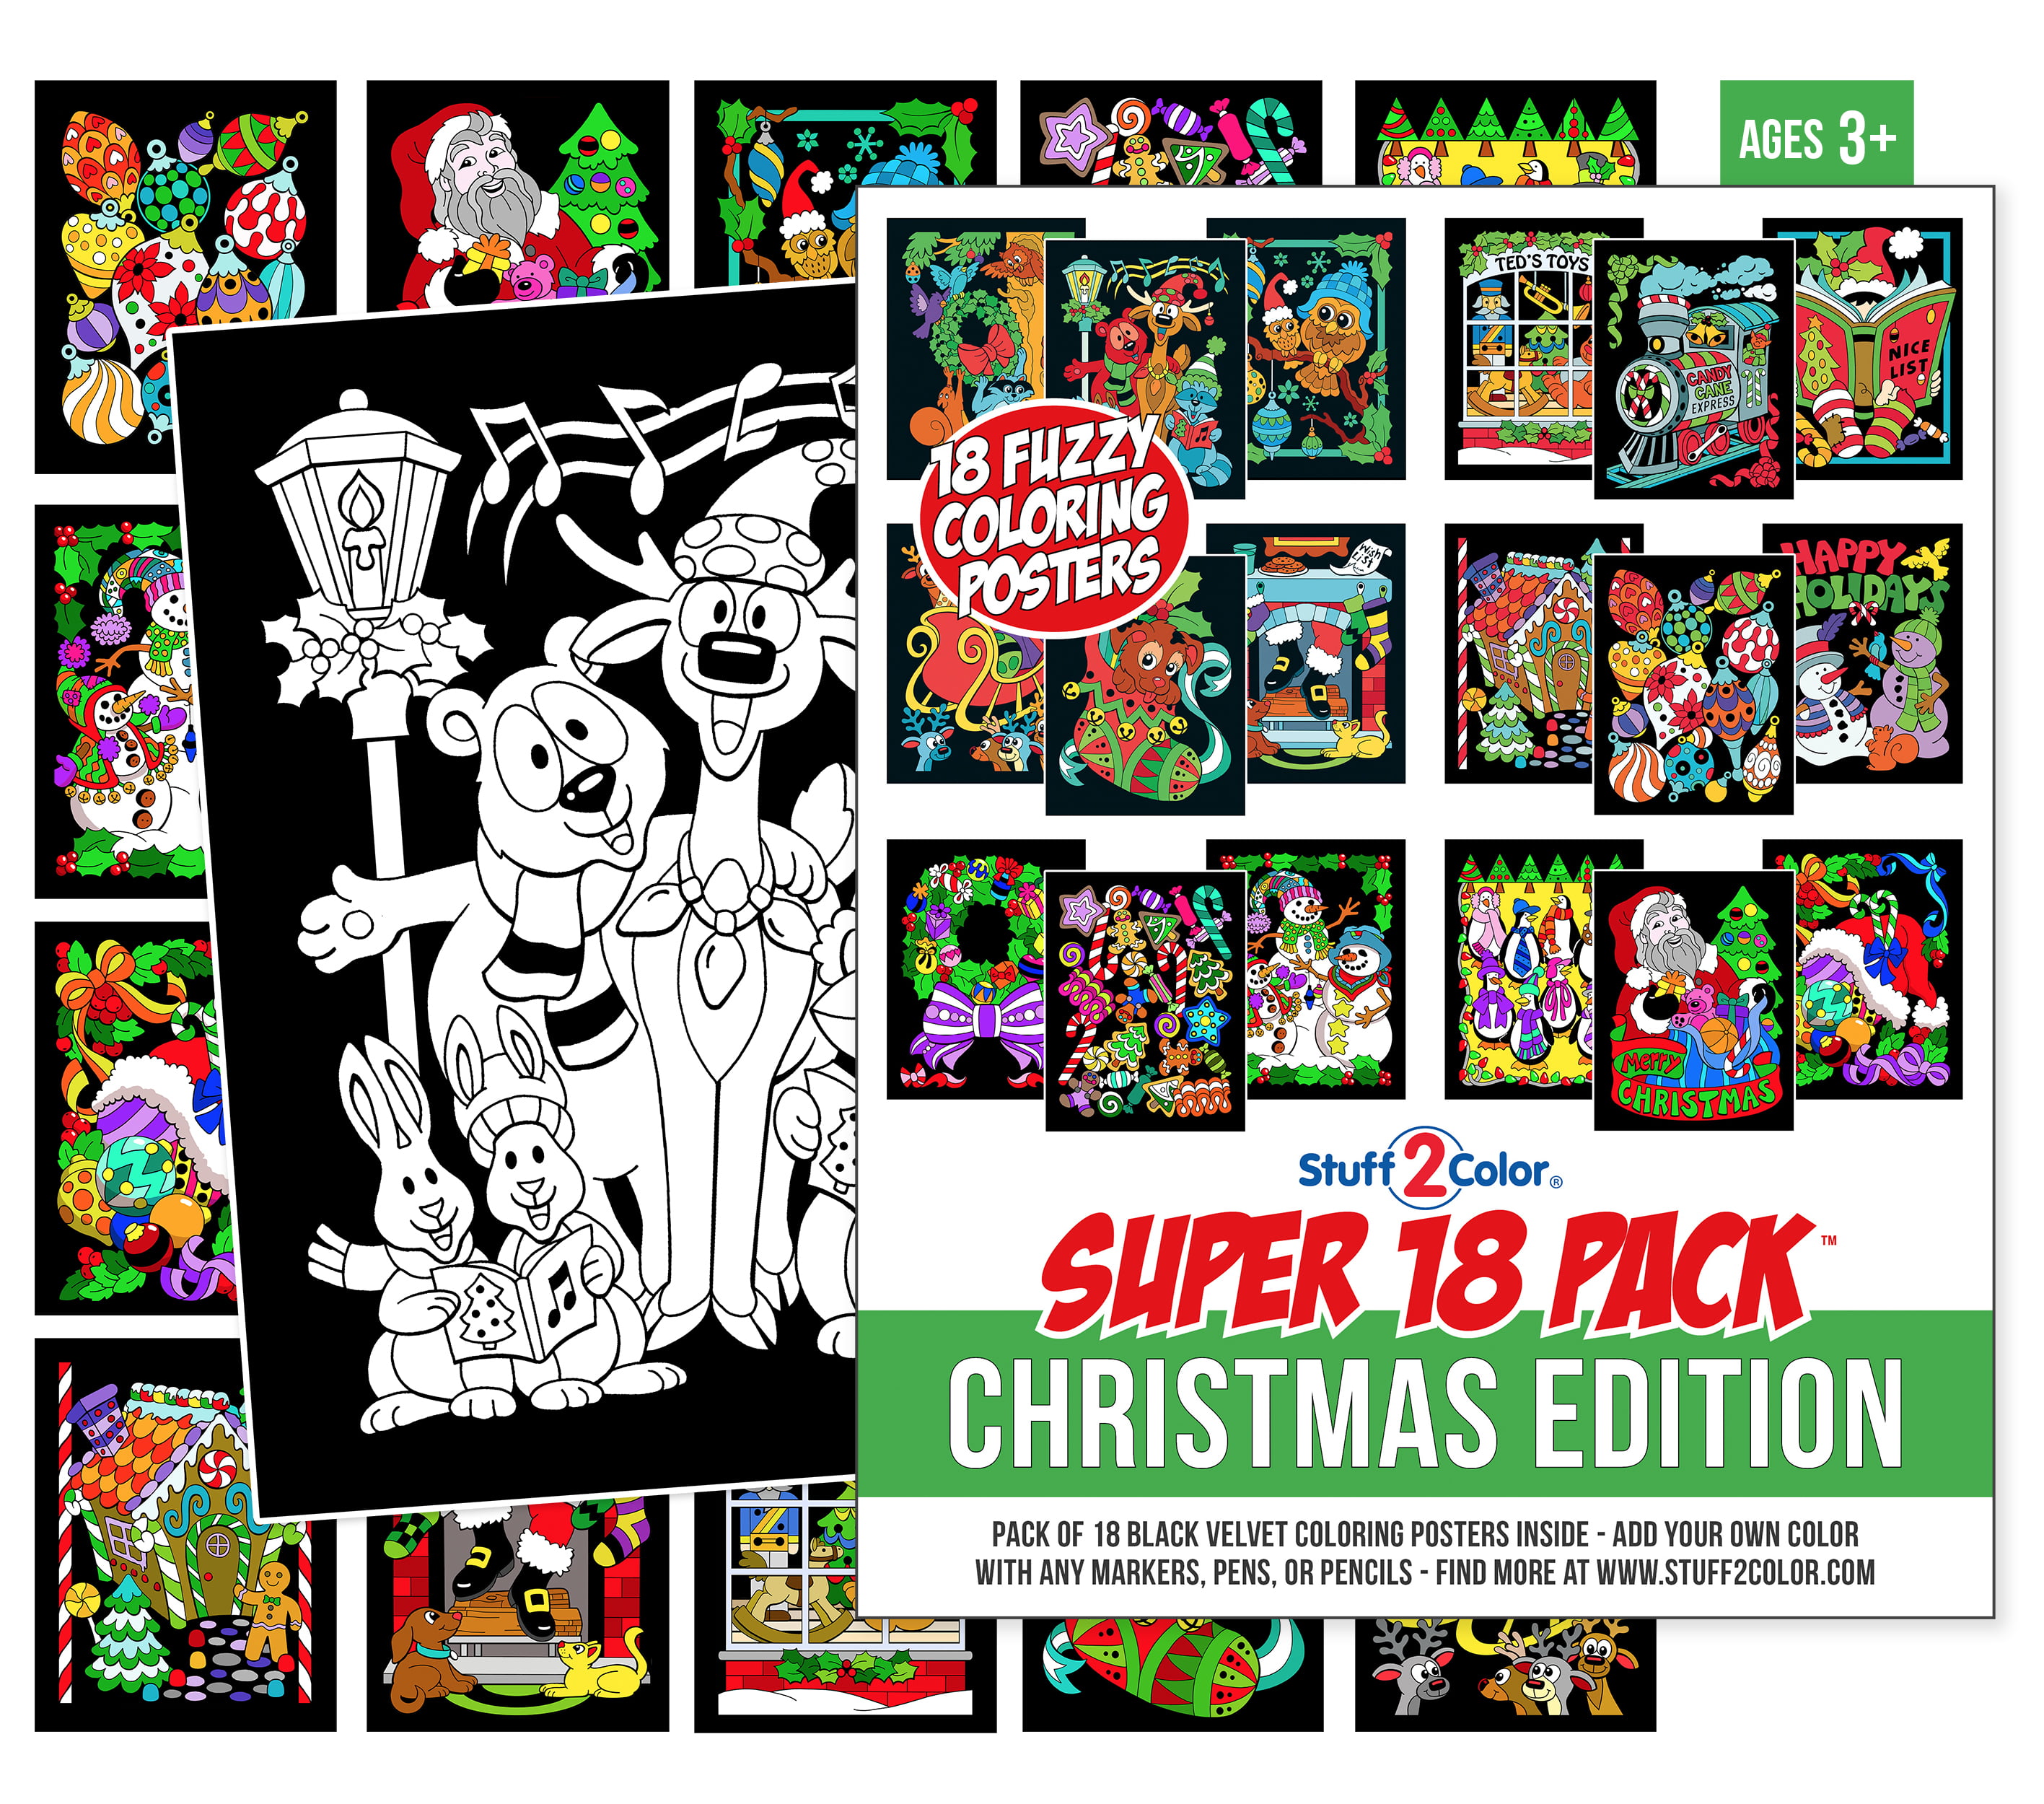 Super Pack of 18 Fuzzy Velvet Coloring Posters (Christmas Edition) -  Holiday Arts and Crafts Project For Kids, Toddlers, And Adults - Stuff2Color